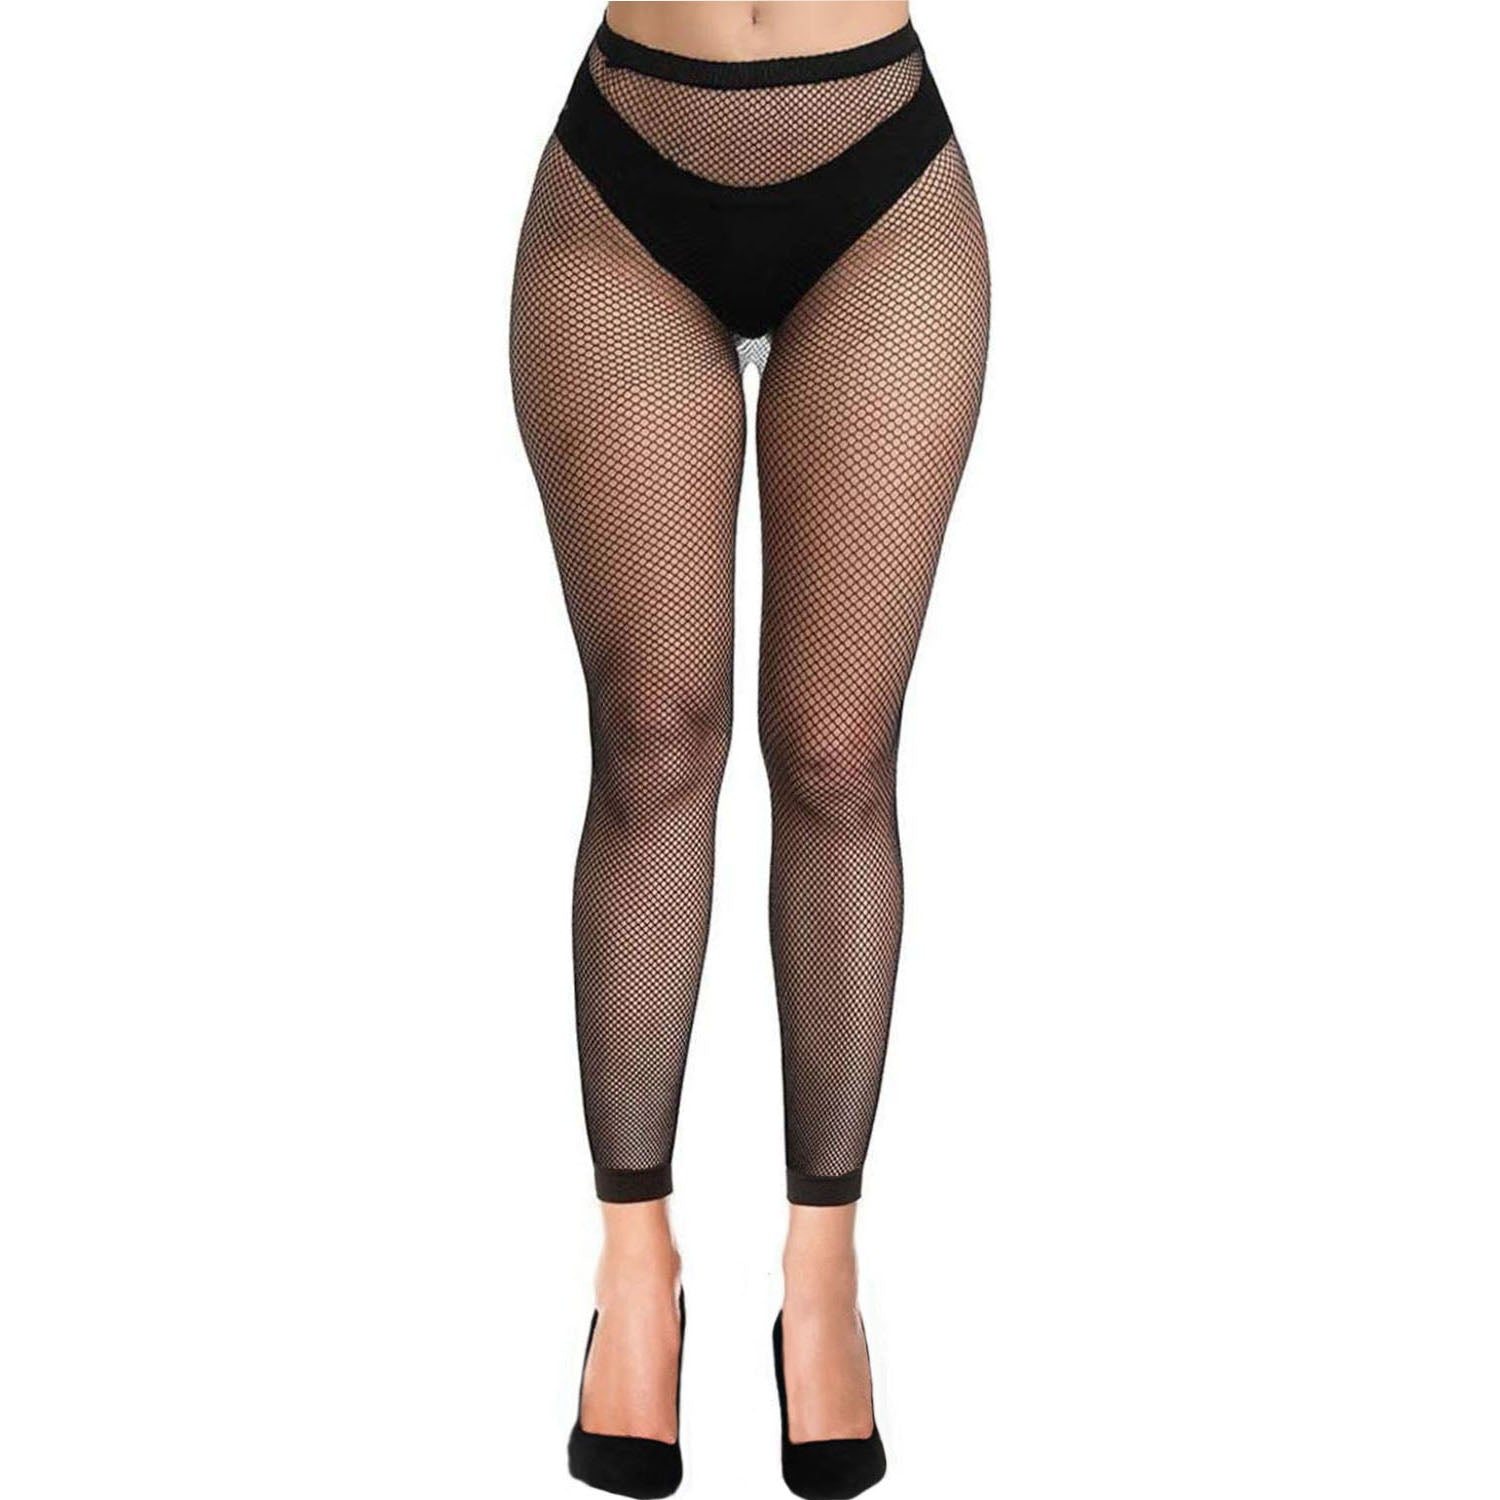 Simply Joshimo Black Fine Fishnet Footless Tights